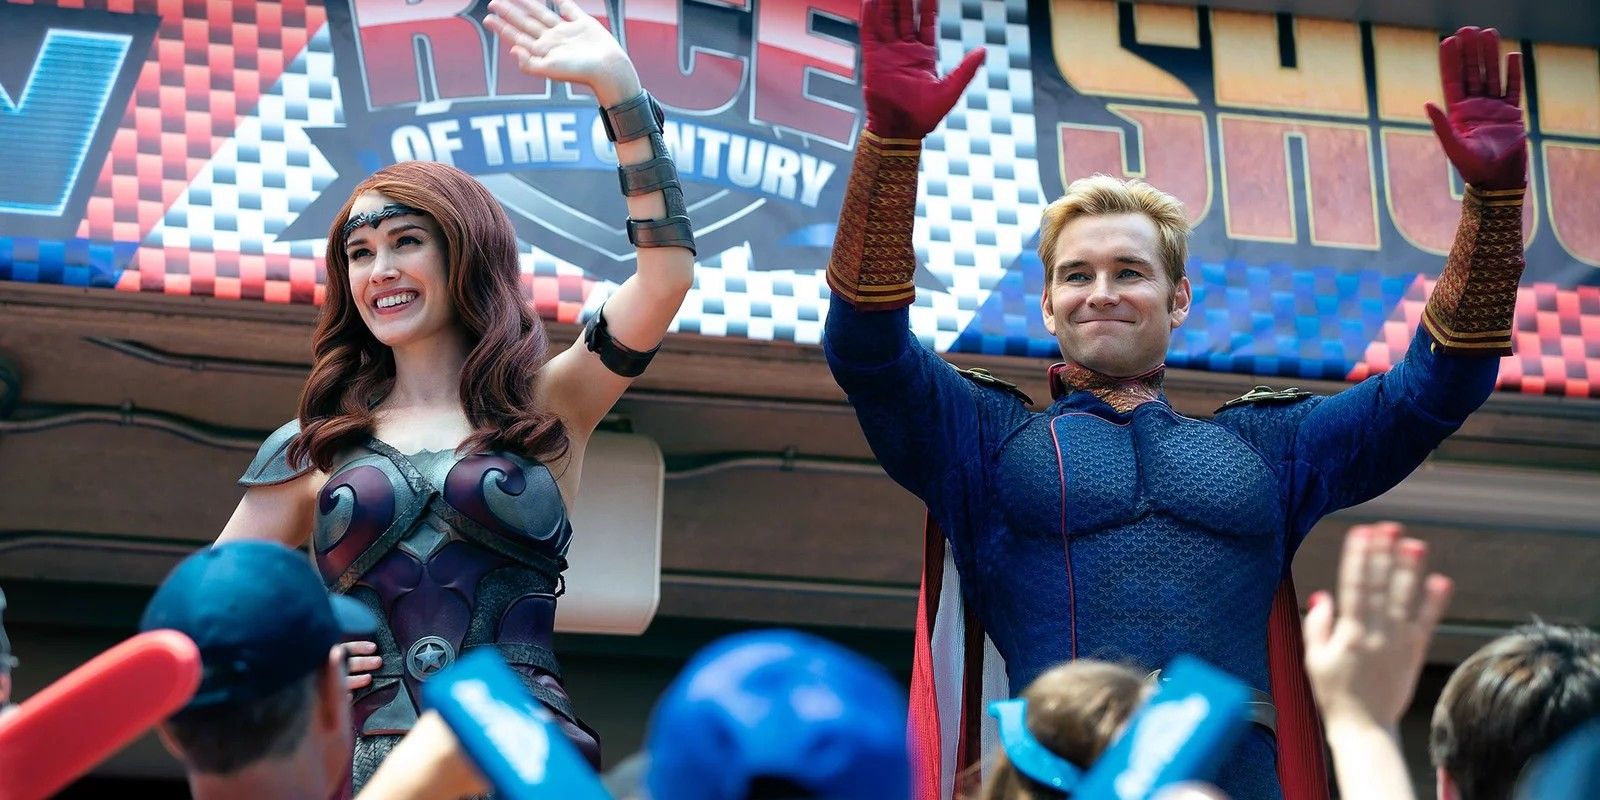 Dominique McElligott as Queen Maeve and Antony Starr as Homelander in The Boys